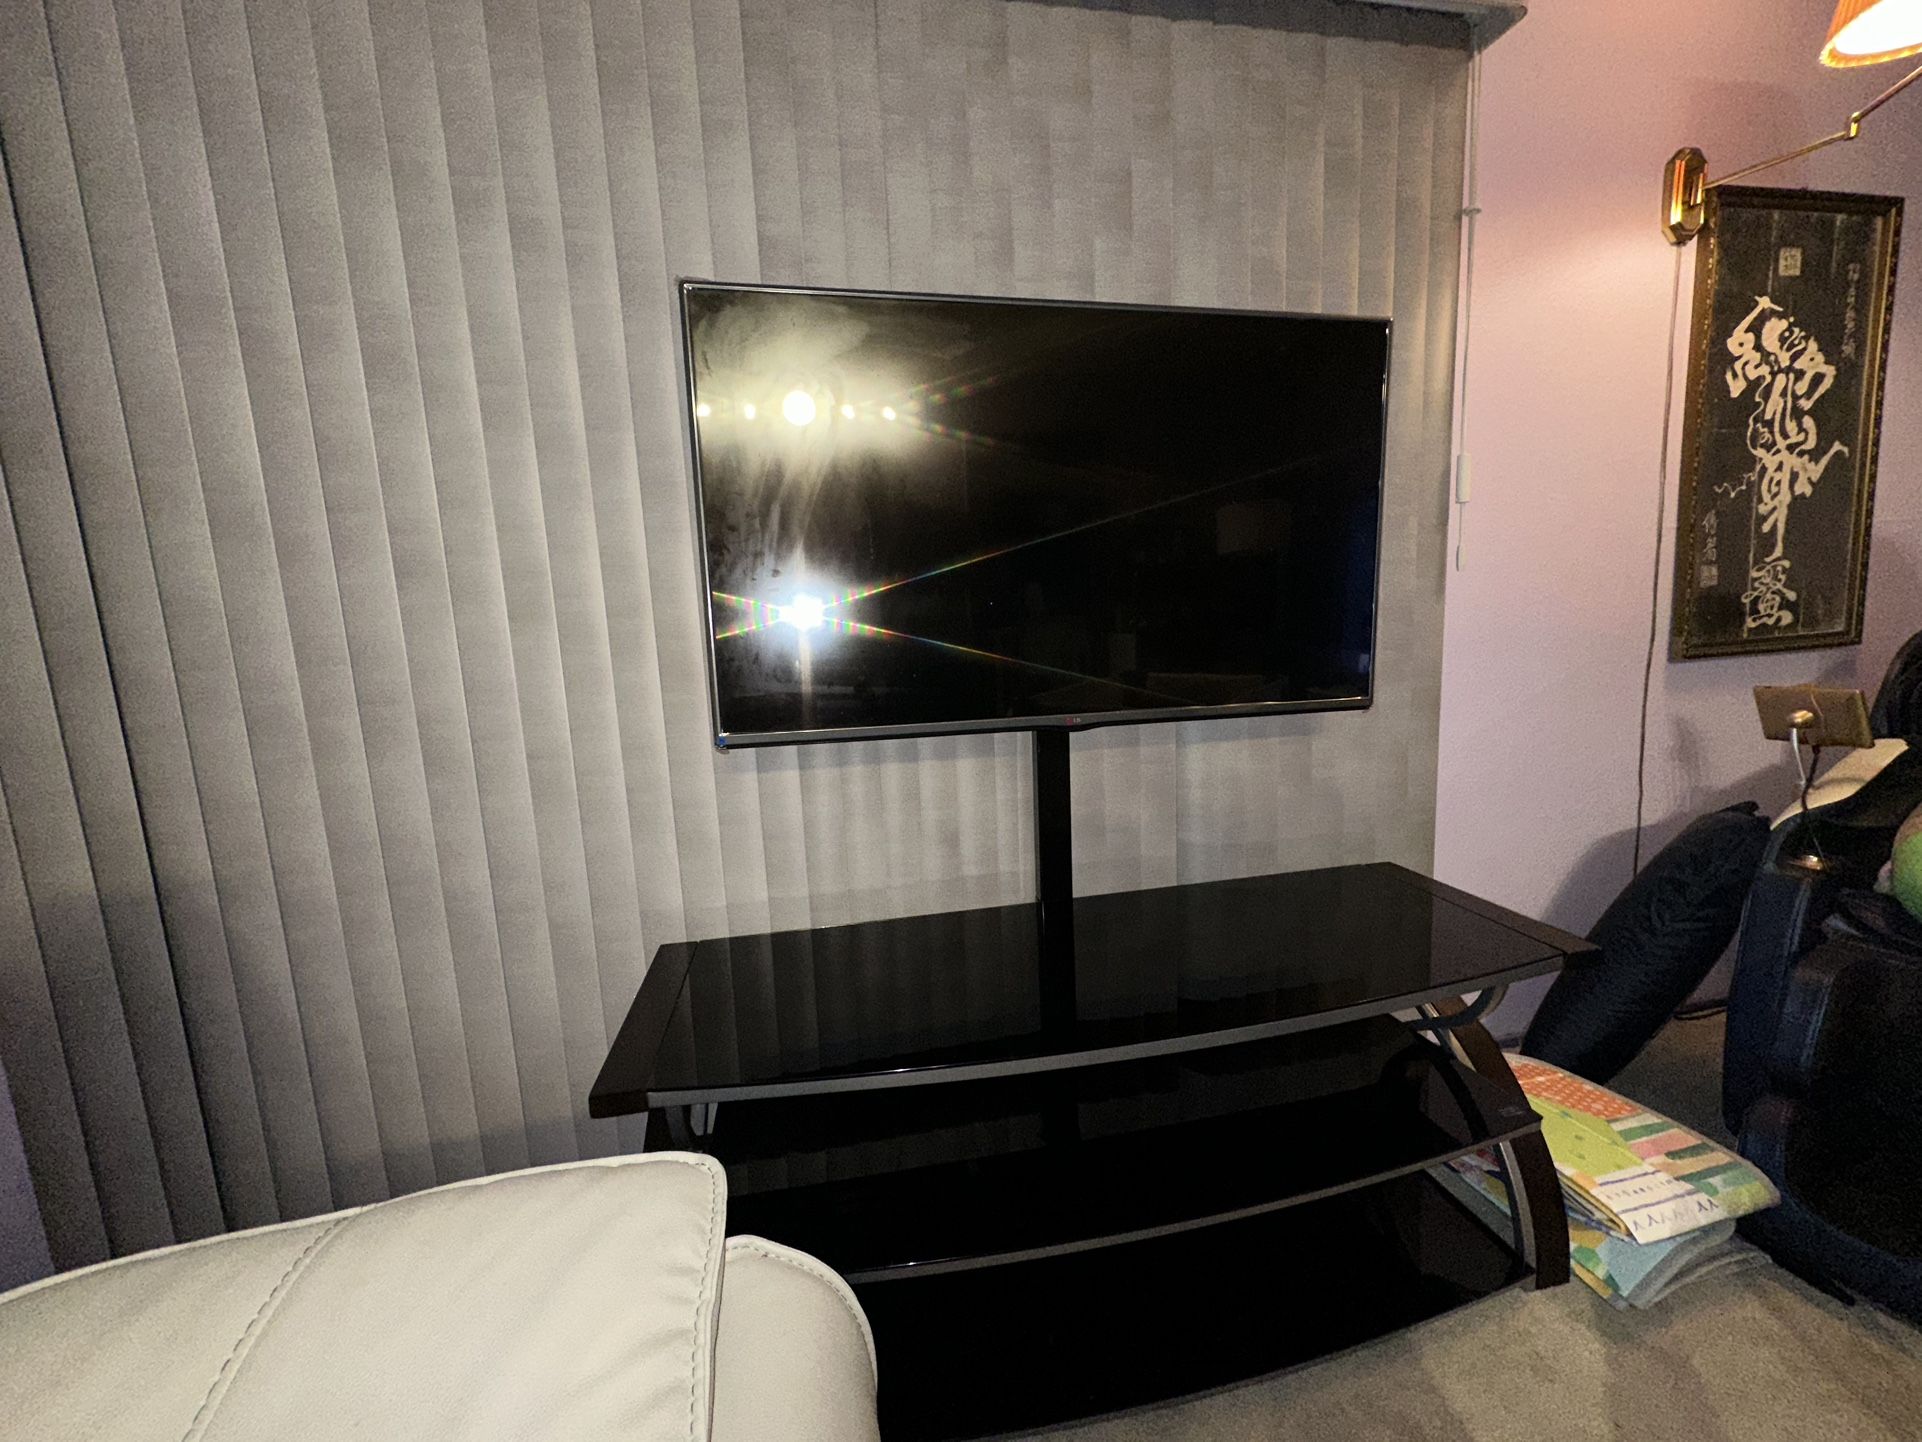 LG TV with stand